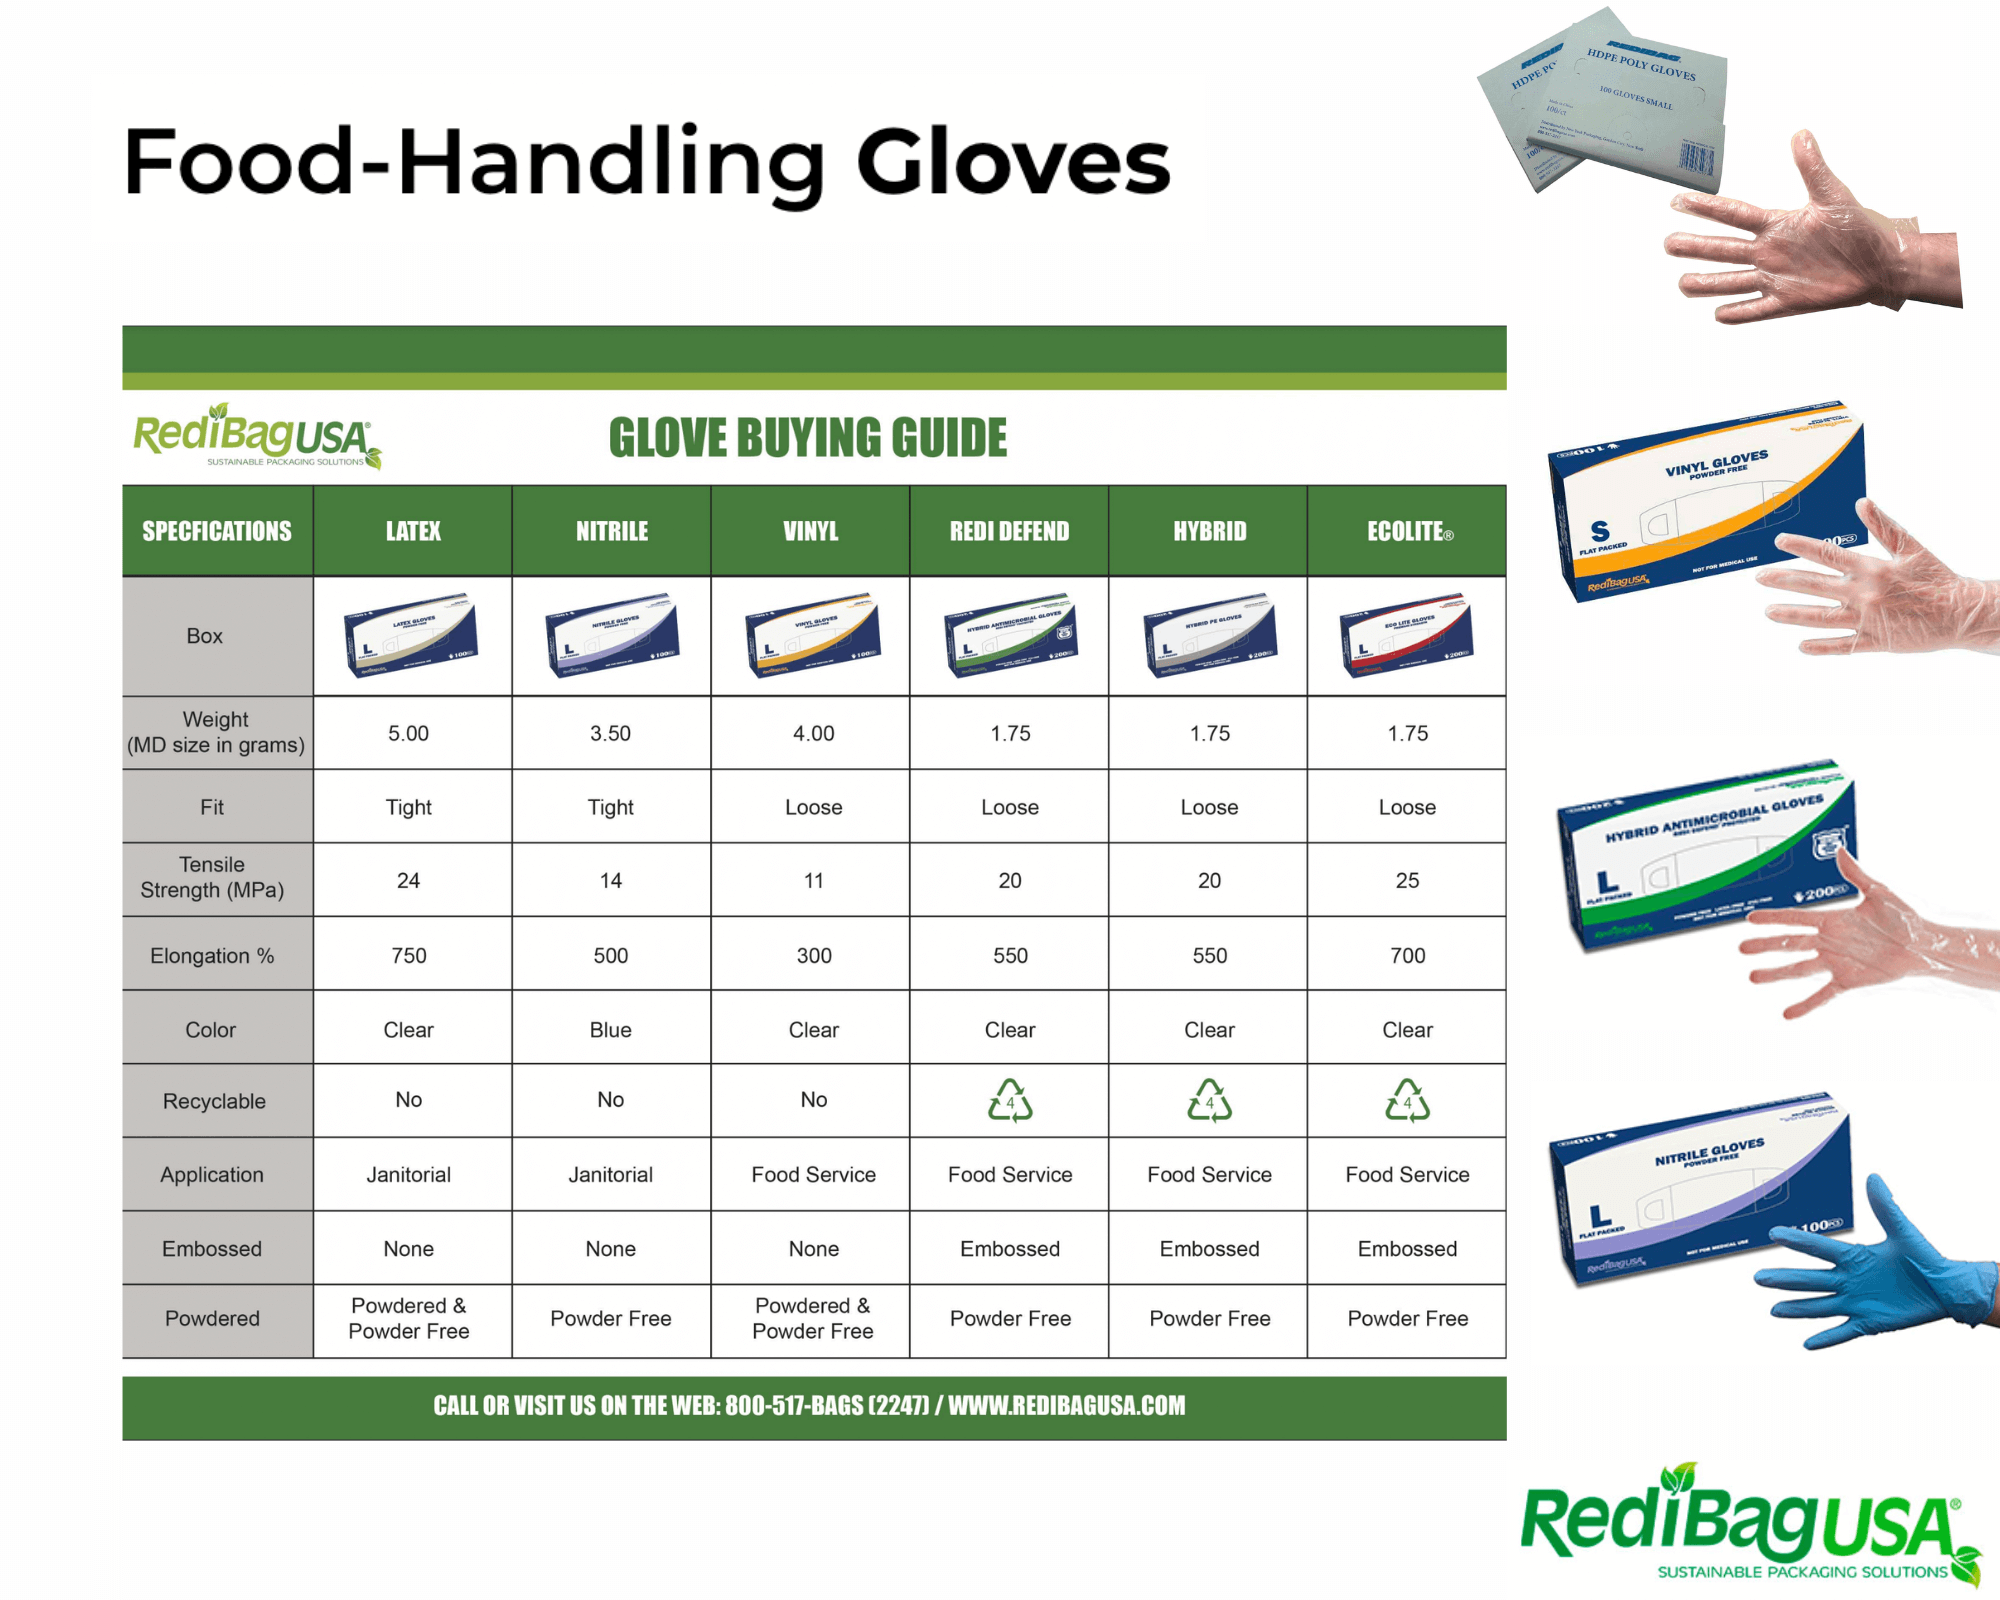 Specification details, images, and available options of RedibagUSA's food-handling gloves.